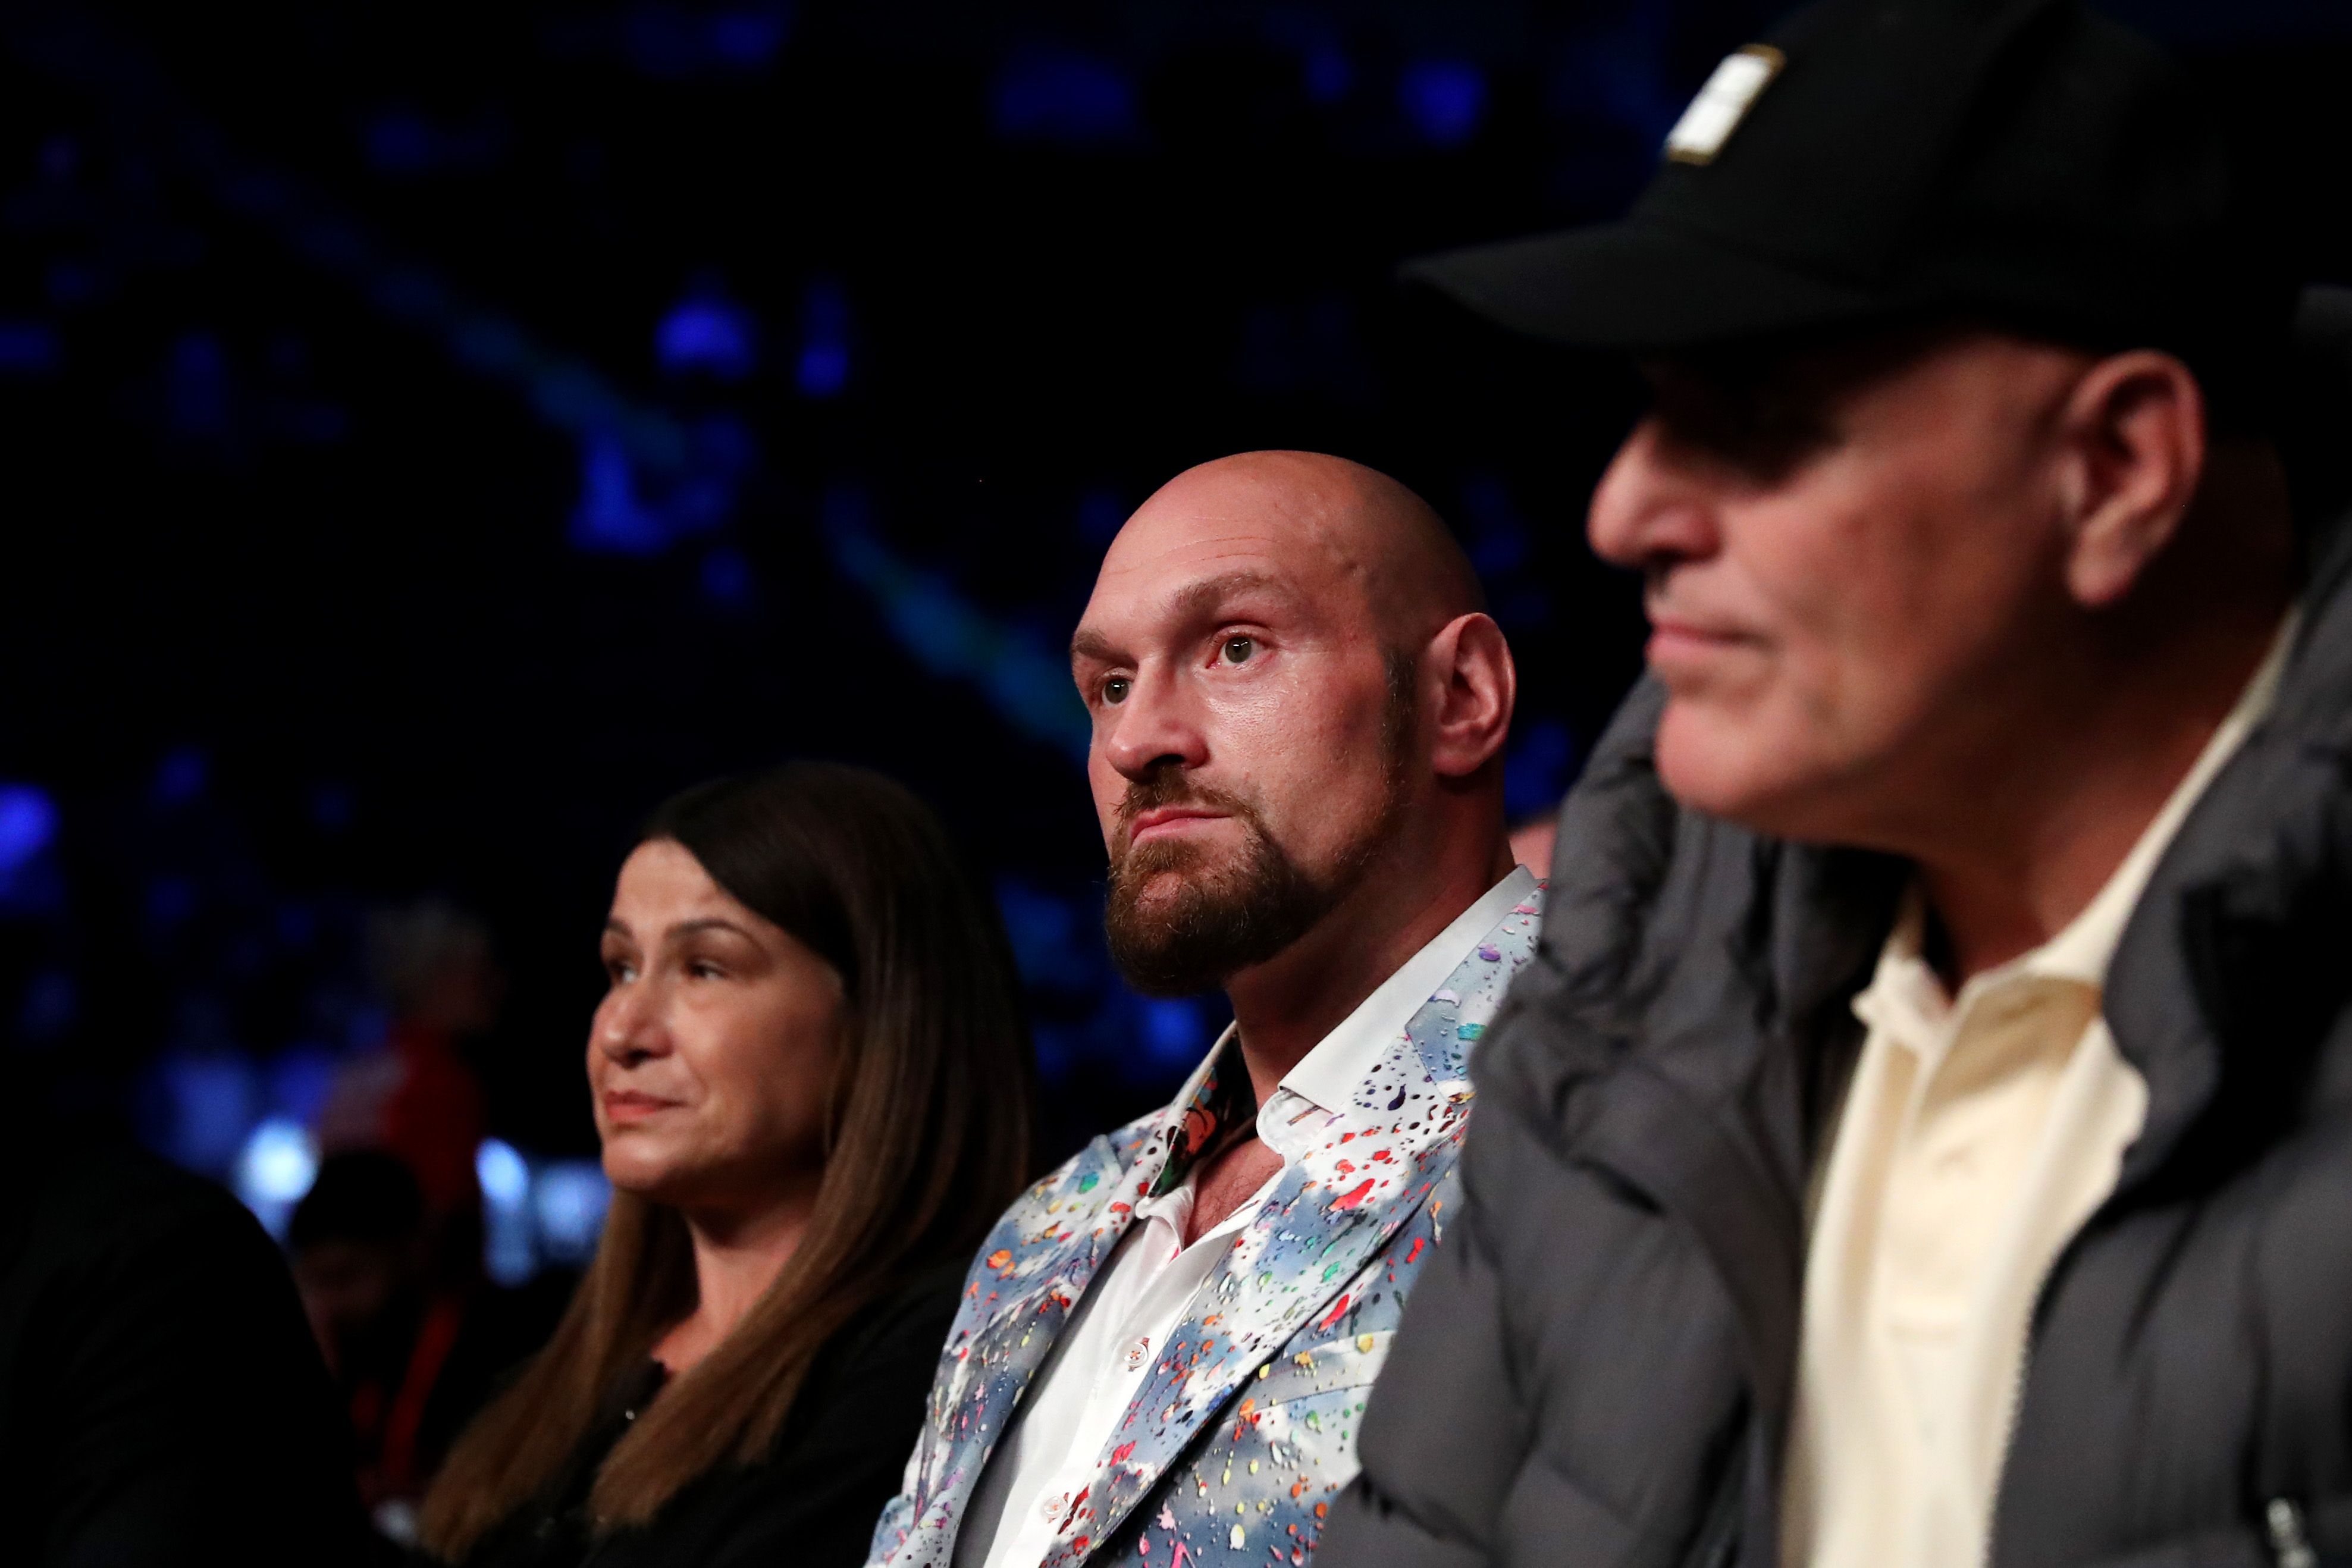 Johnny Nelson: Tyson Fury could face backlash if he doesn't fight Anthony Joshua next